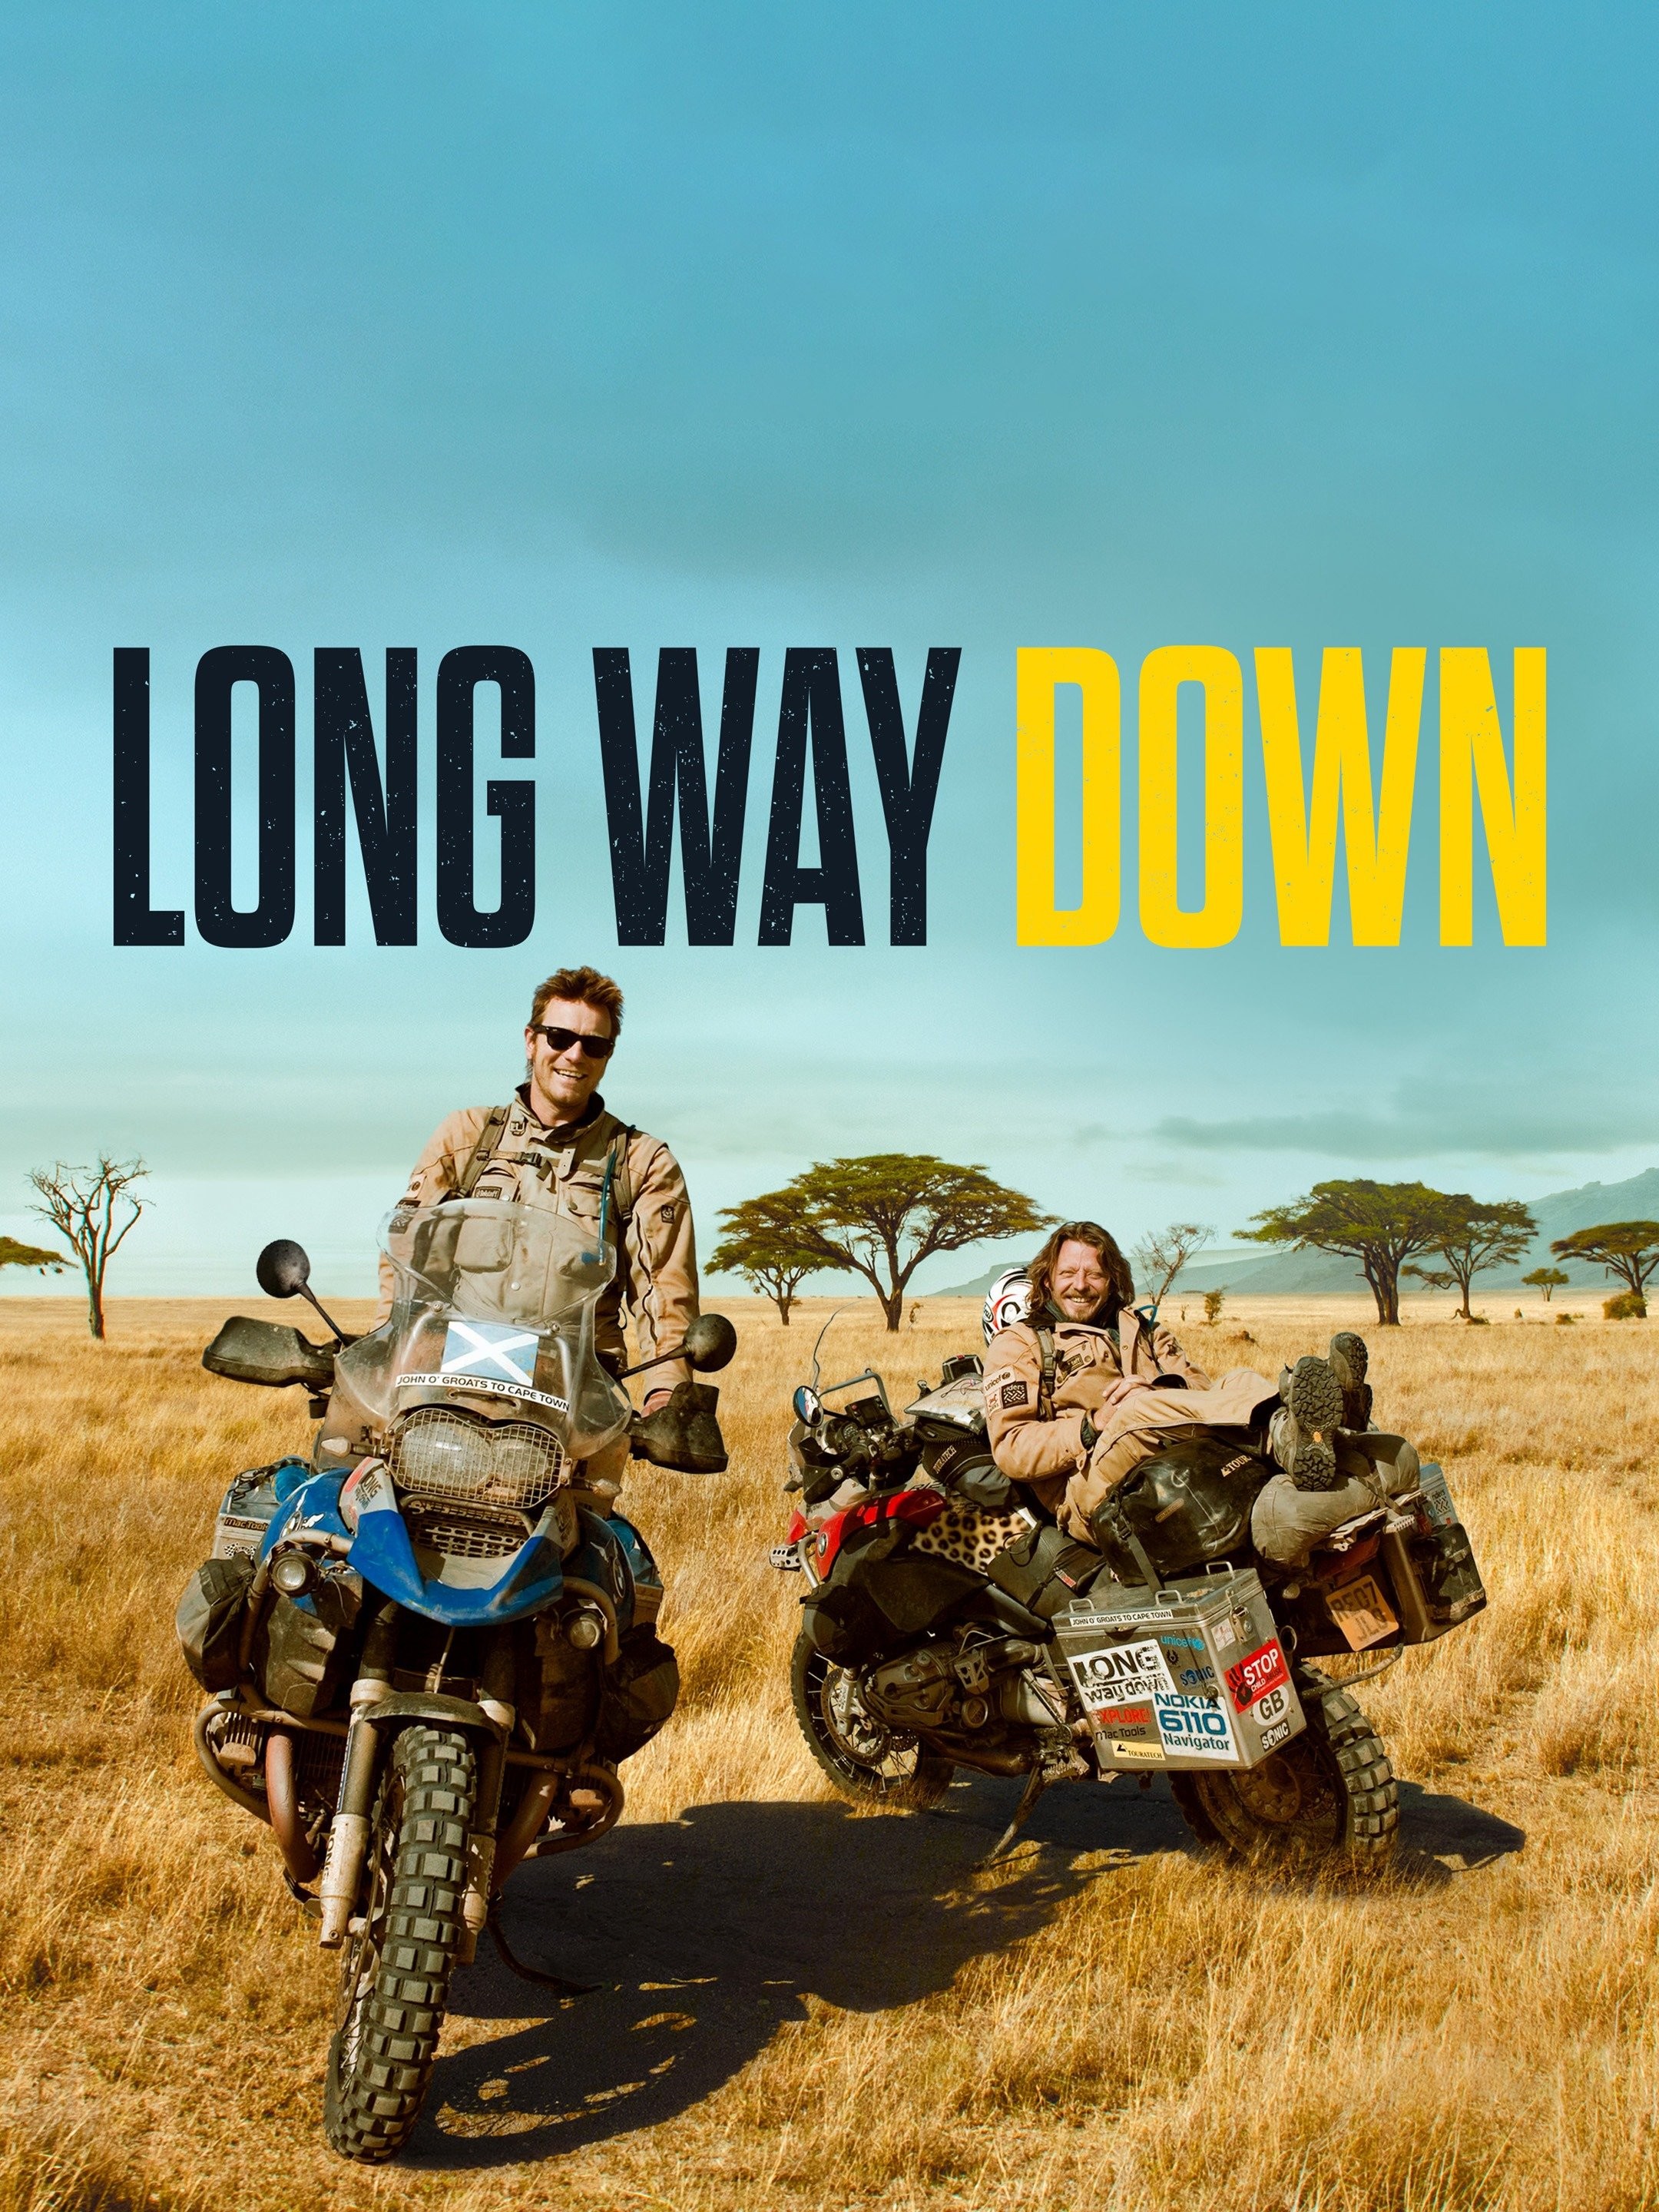 A Long Way Down - Official Trailer 